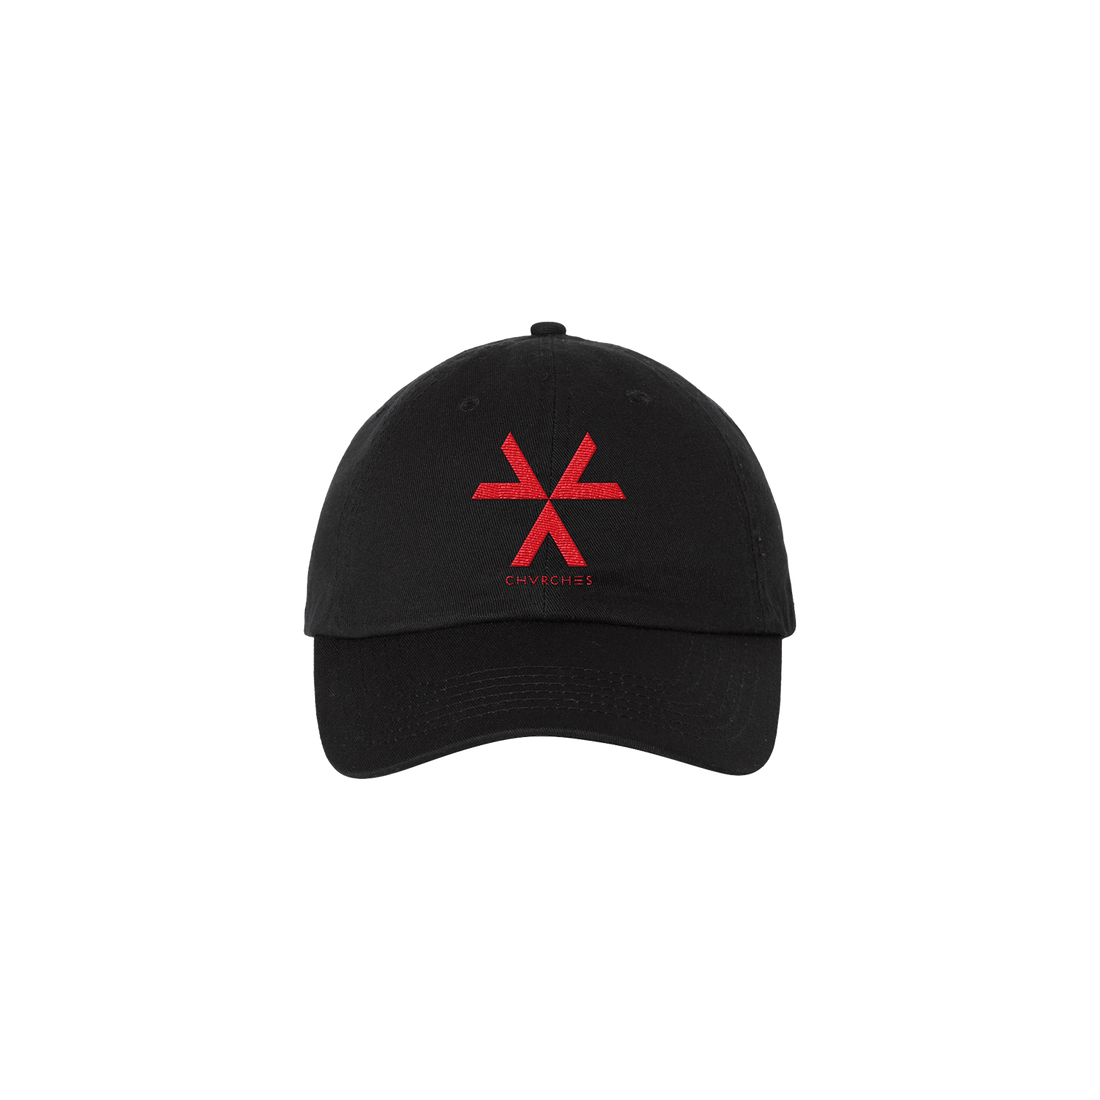 Official CHVRCHES Merchandise. Black low profile classic dad hat featuring The Bones of What You Believe album logo emboirdered in red on the front.